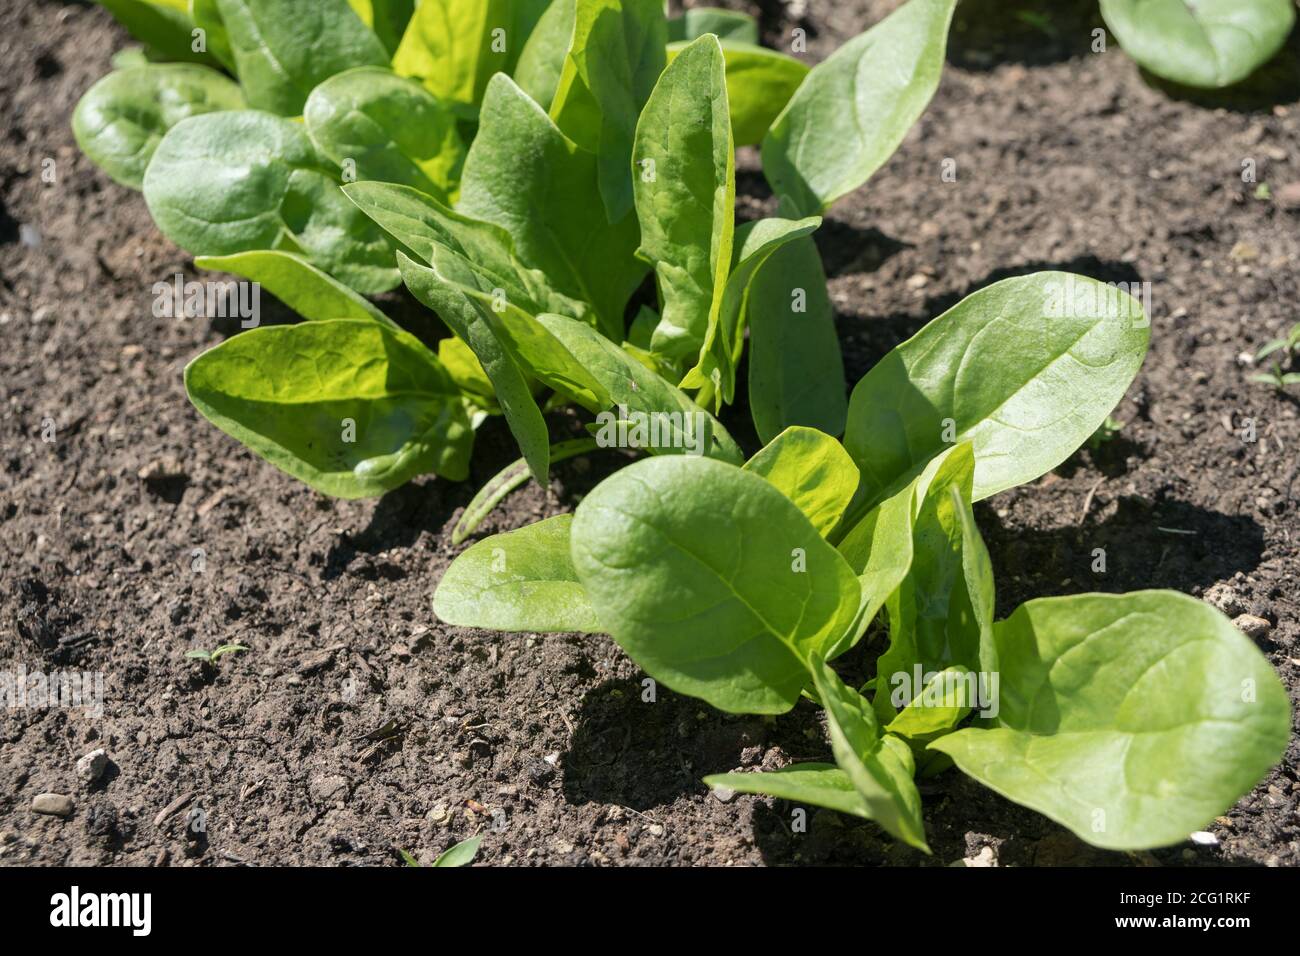 Seedlings of oleifinous spinach hatched out of the ground in a garden in a vegetable garden. Stock Photo